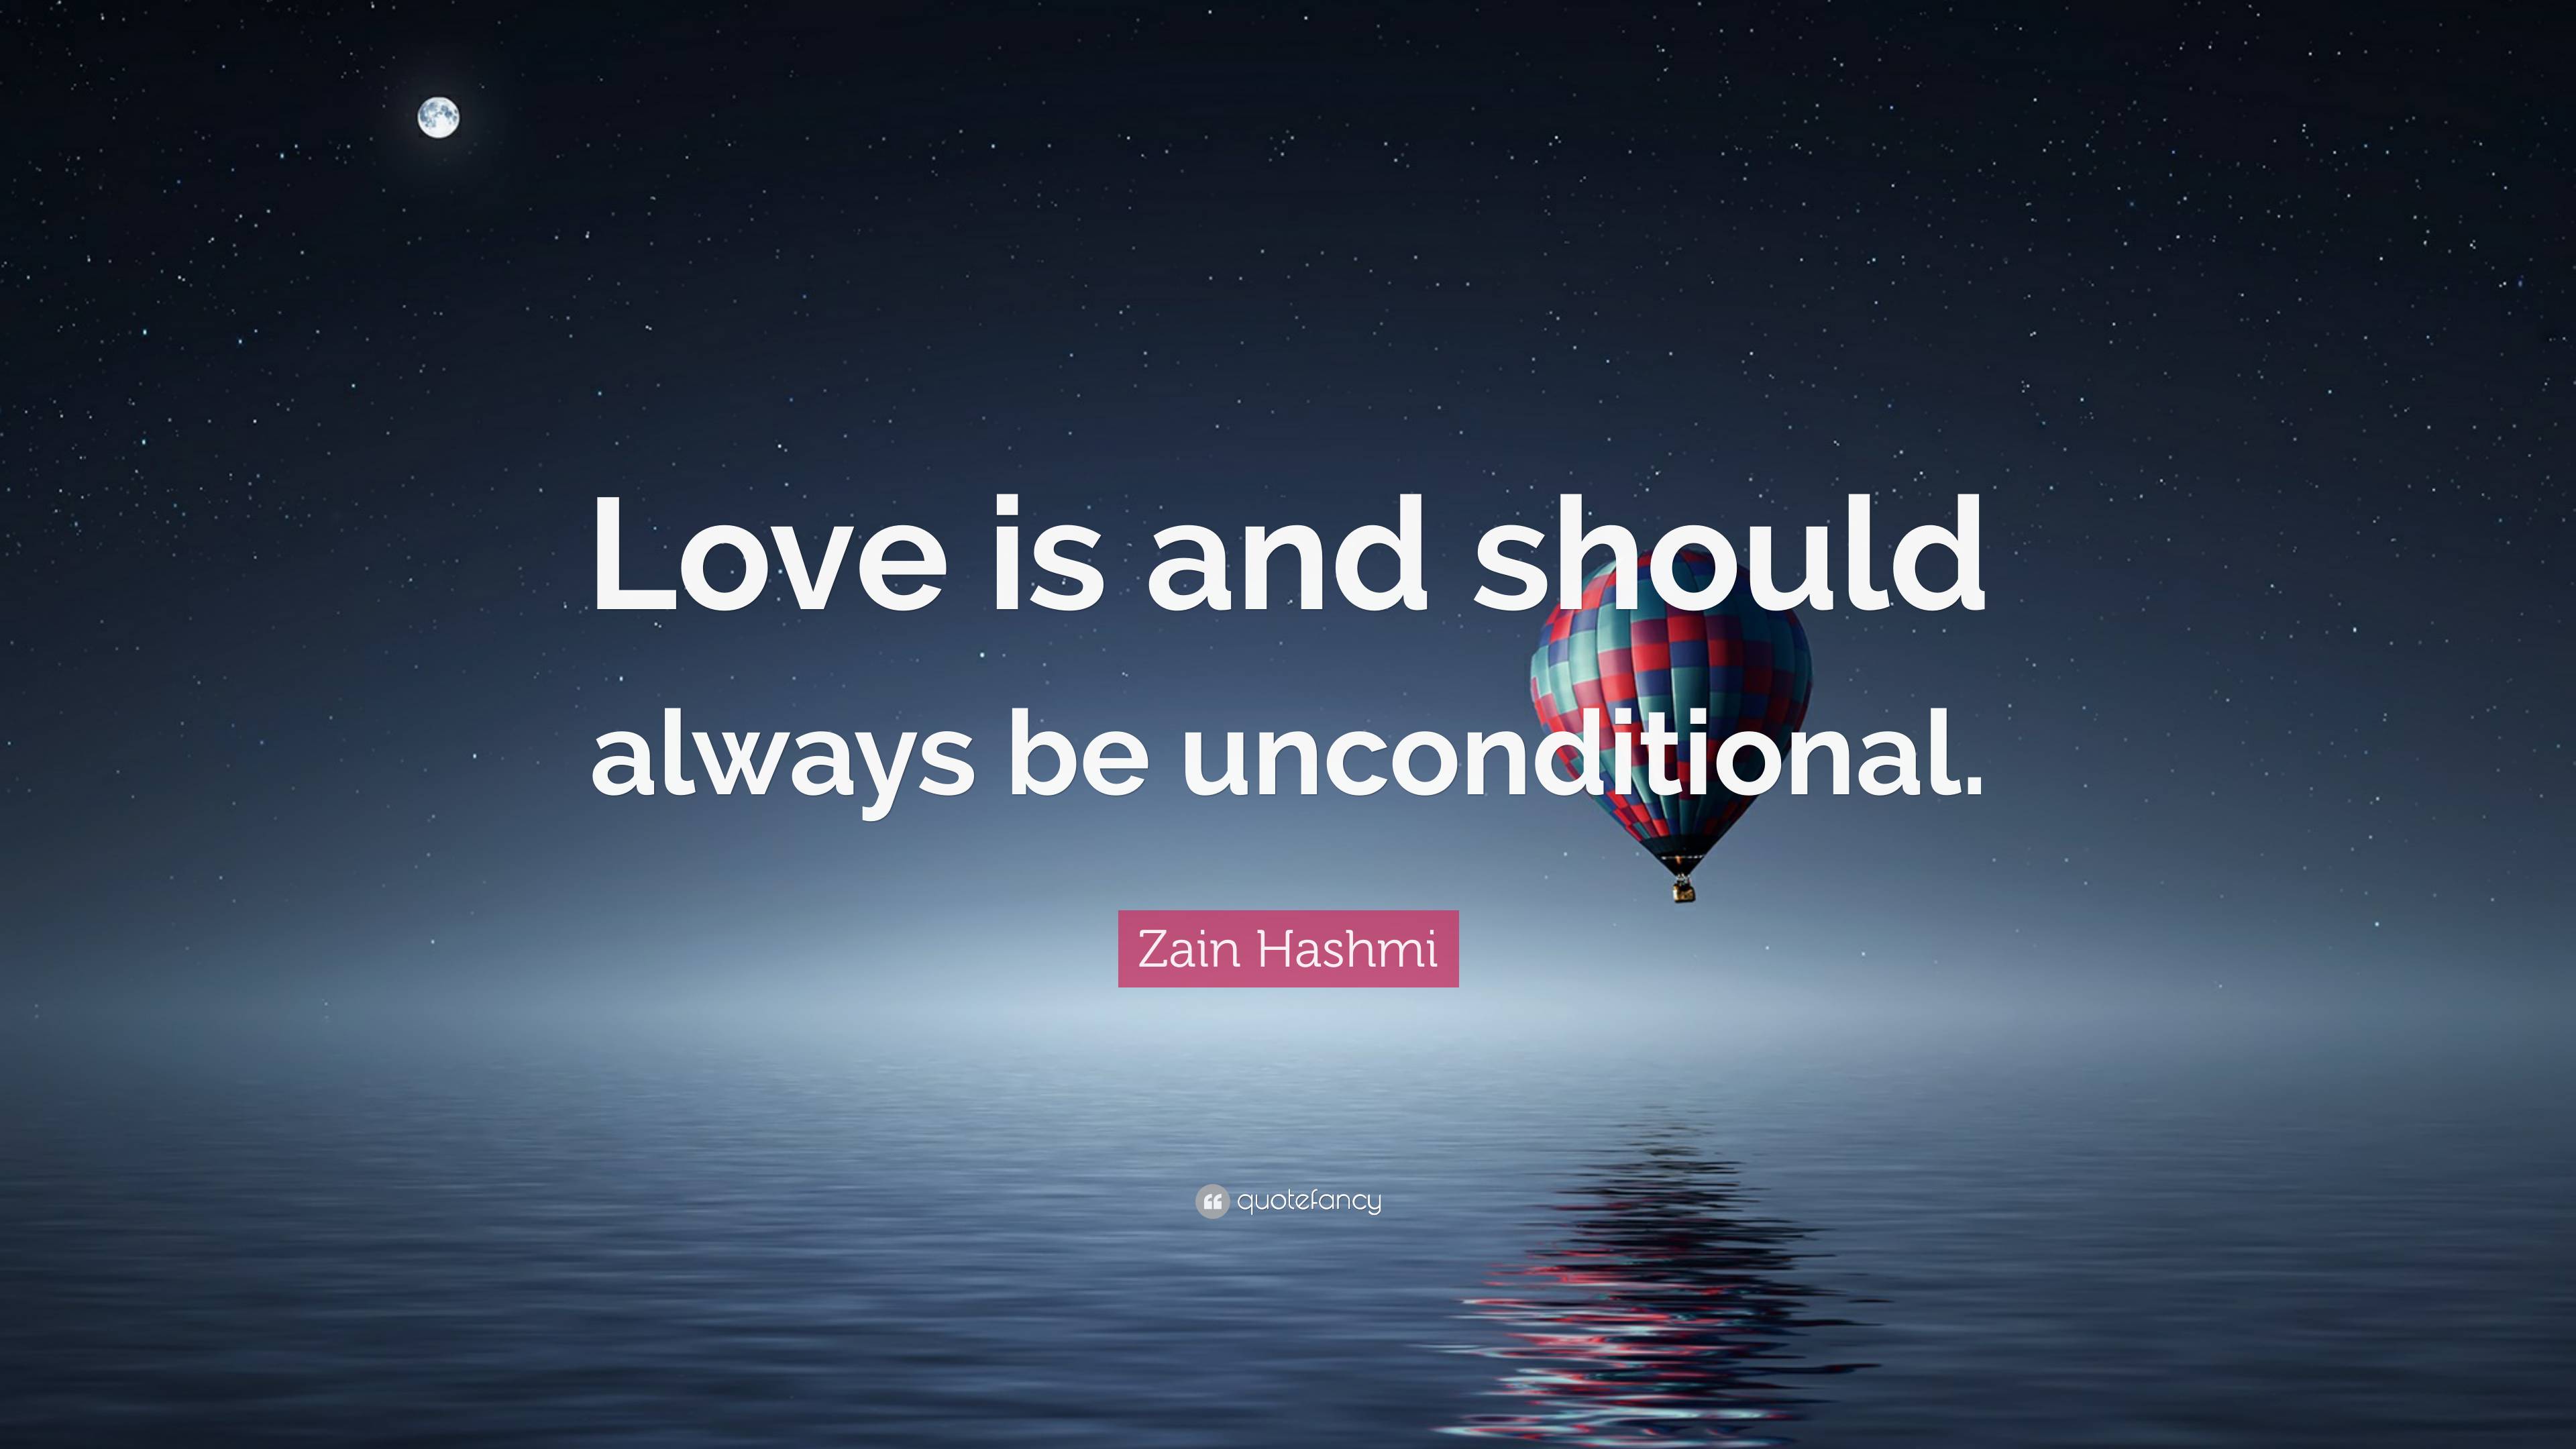 7181145 Zain Hashmi Quote Love Is And Should Always Be Unconditional 